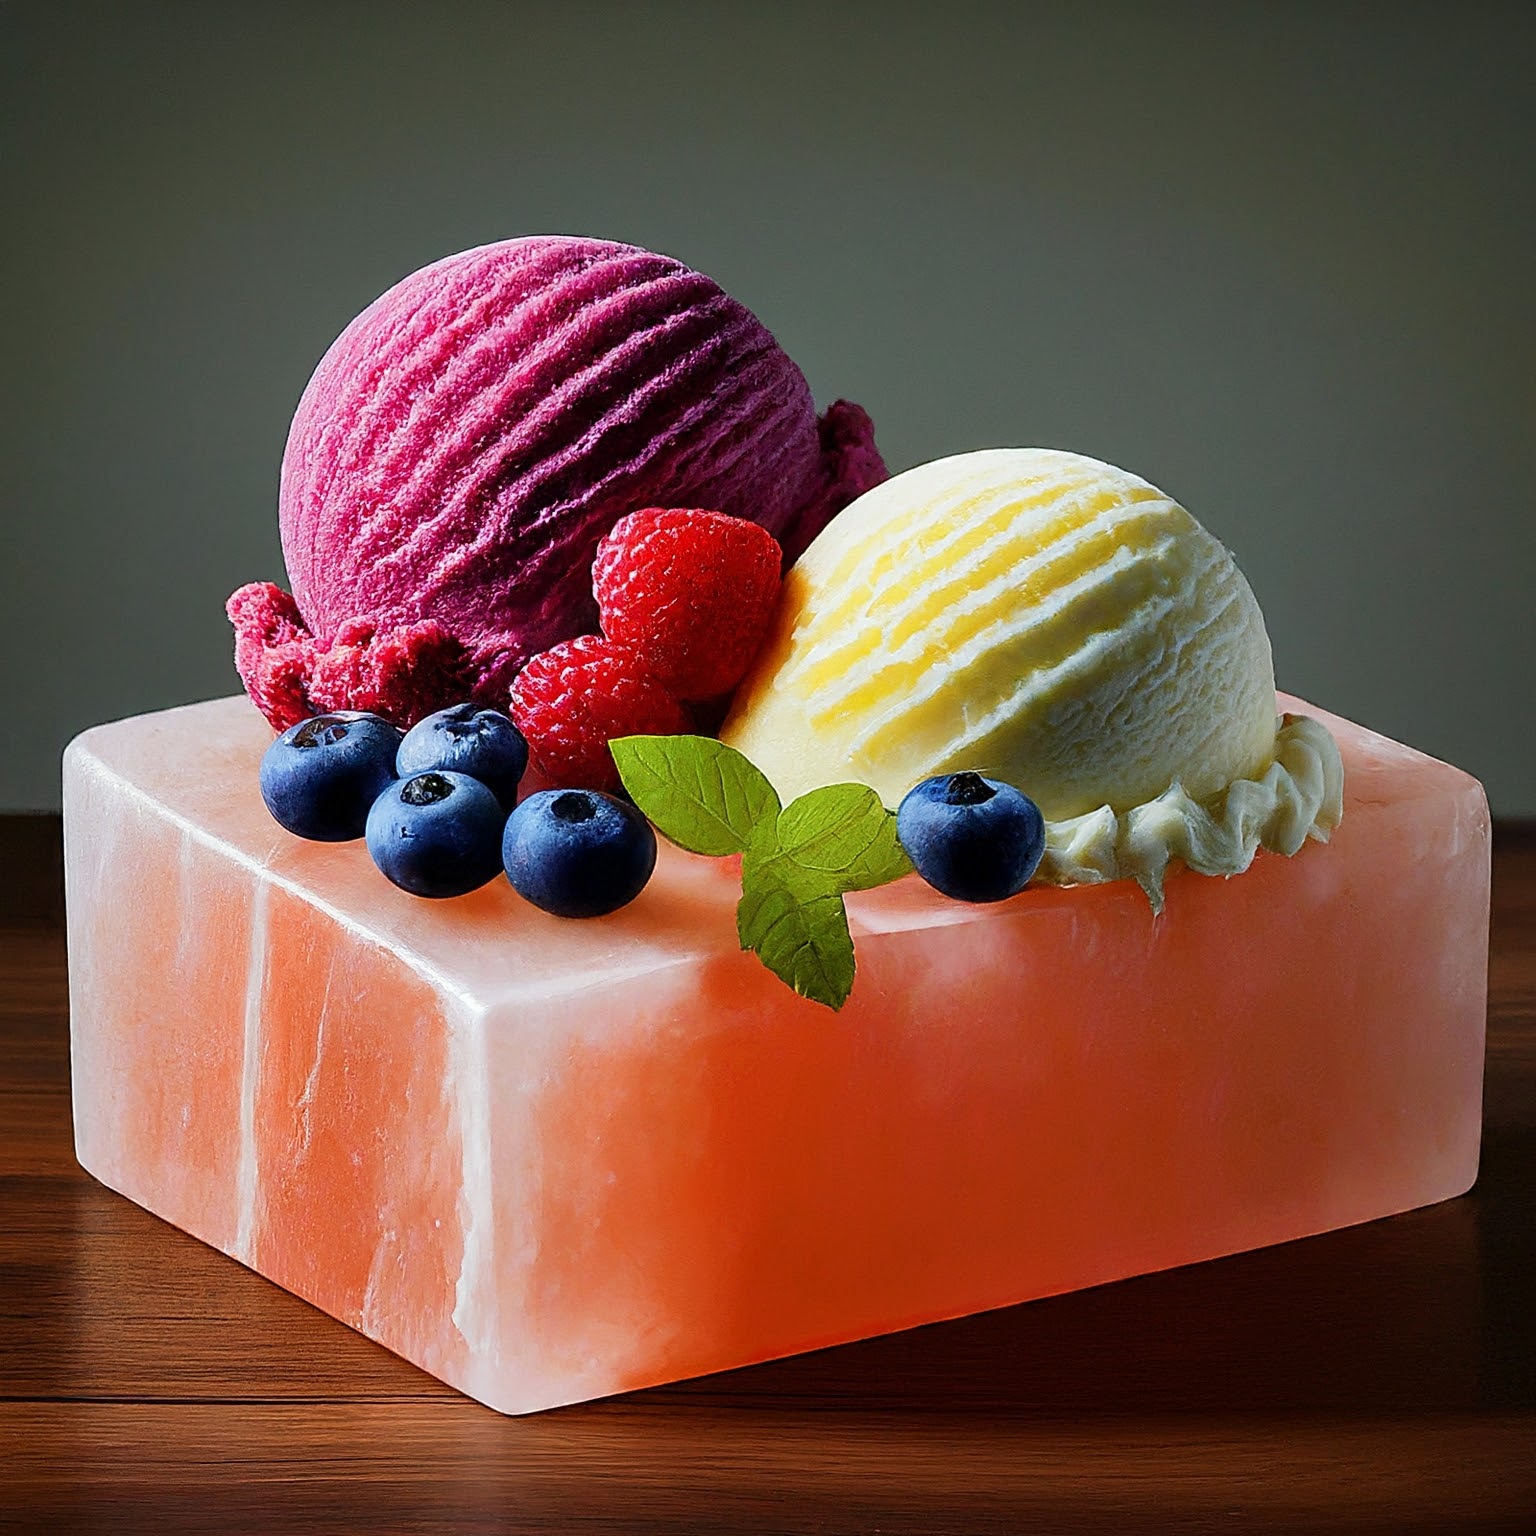 A vibrant platter of raspberry, lemon, and blueberry sorbet scoops arranged on a chilled Himalayan salt block, garnished with fresh berries.